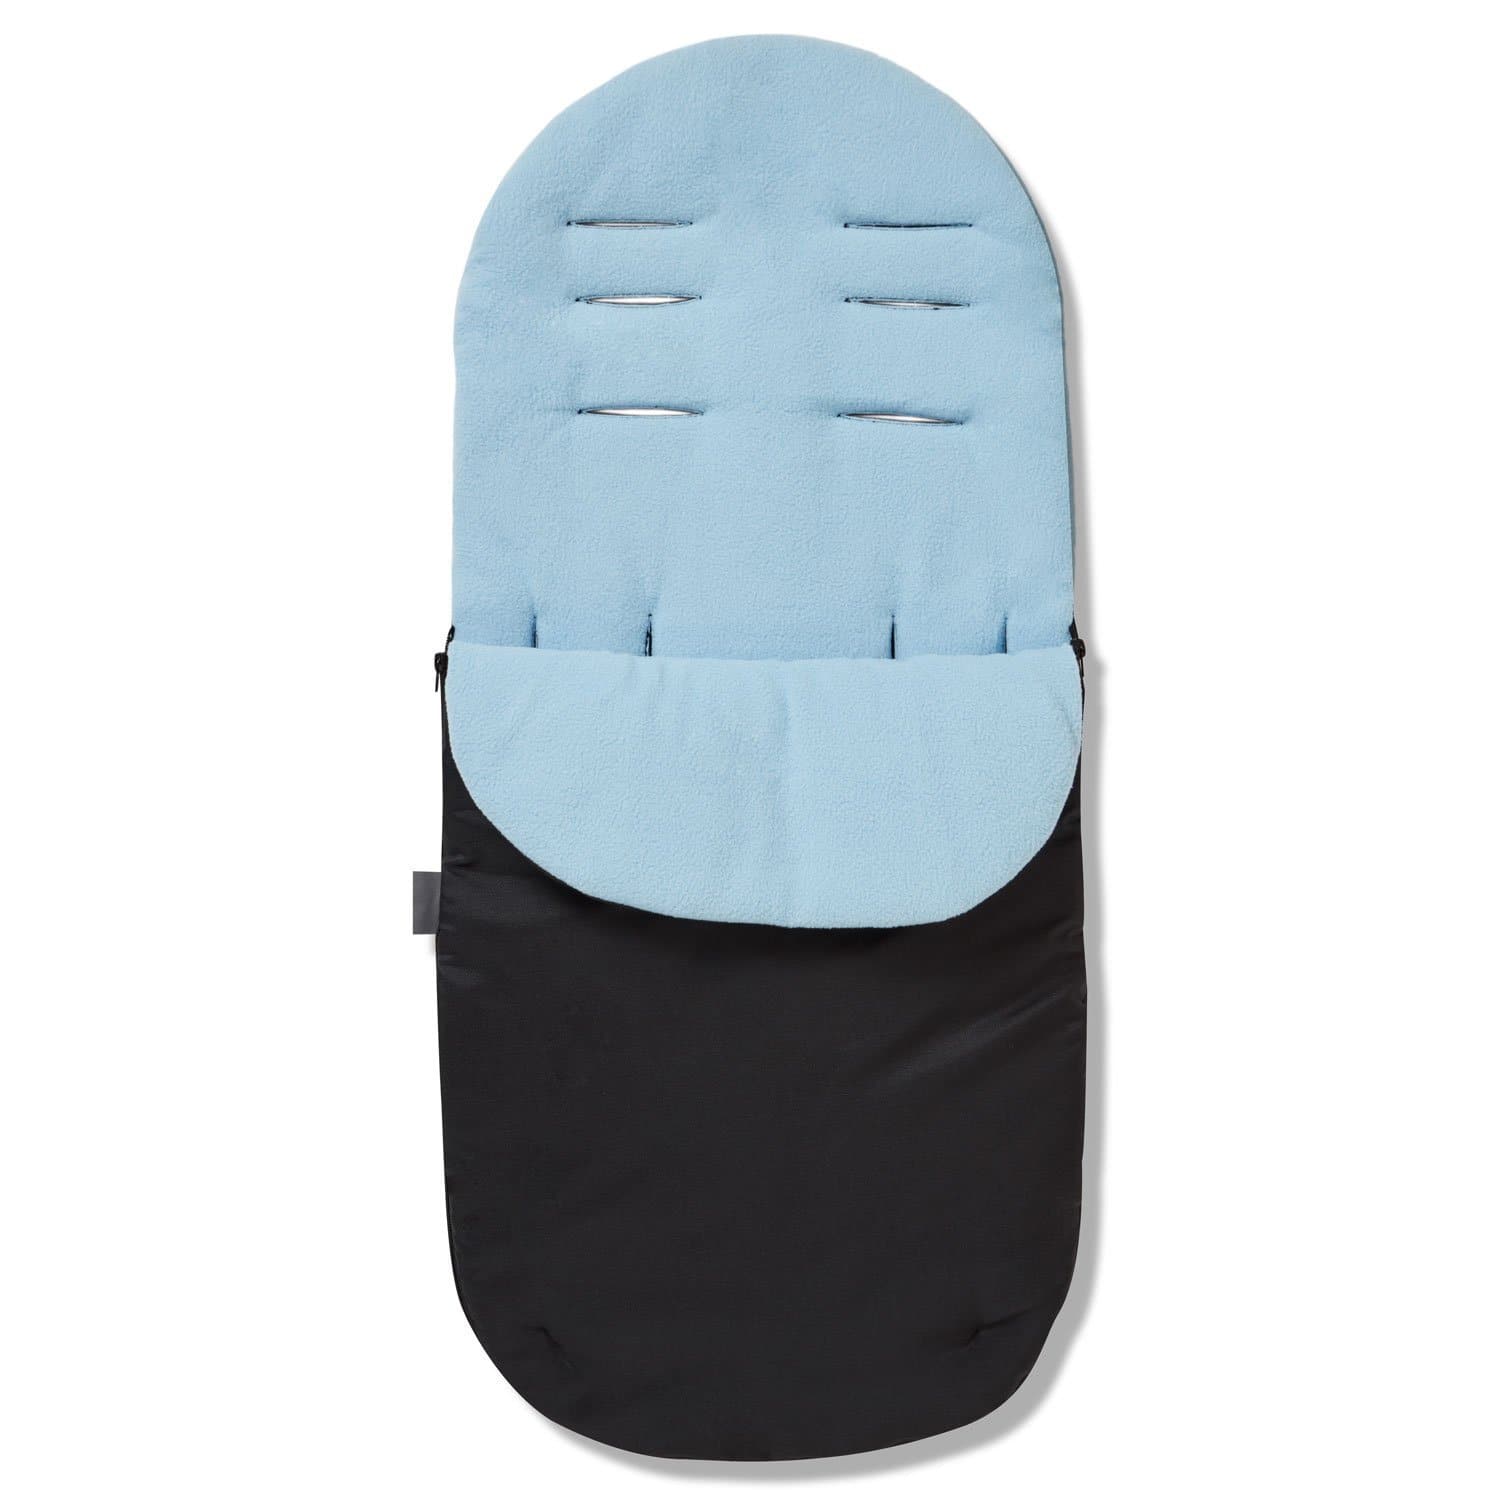 Footmuff / Cosy Toes Compatible with Unilove - Light Blue / Fits All Models | For Your Little One